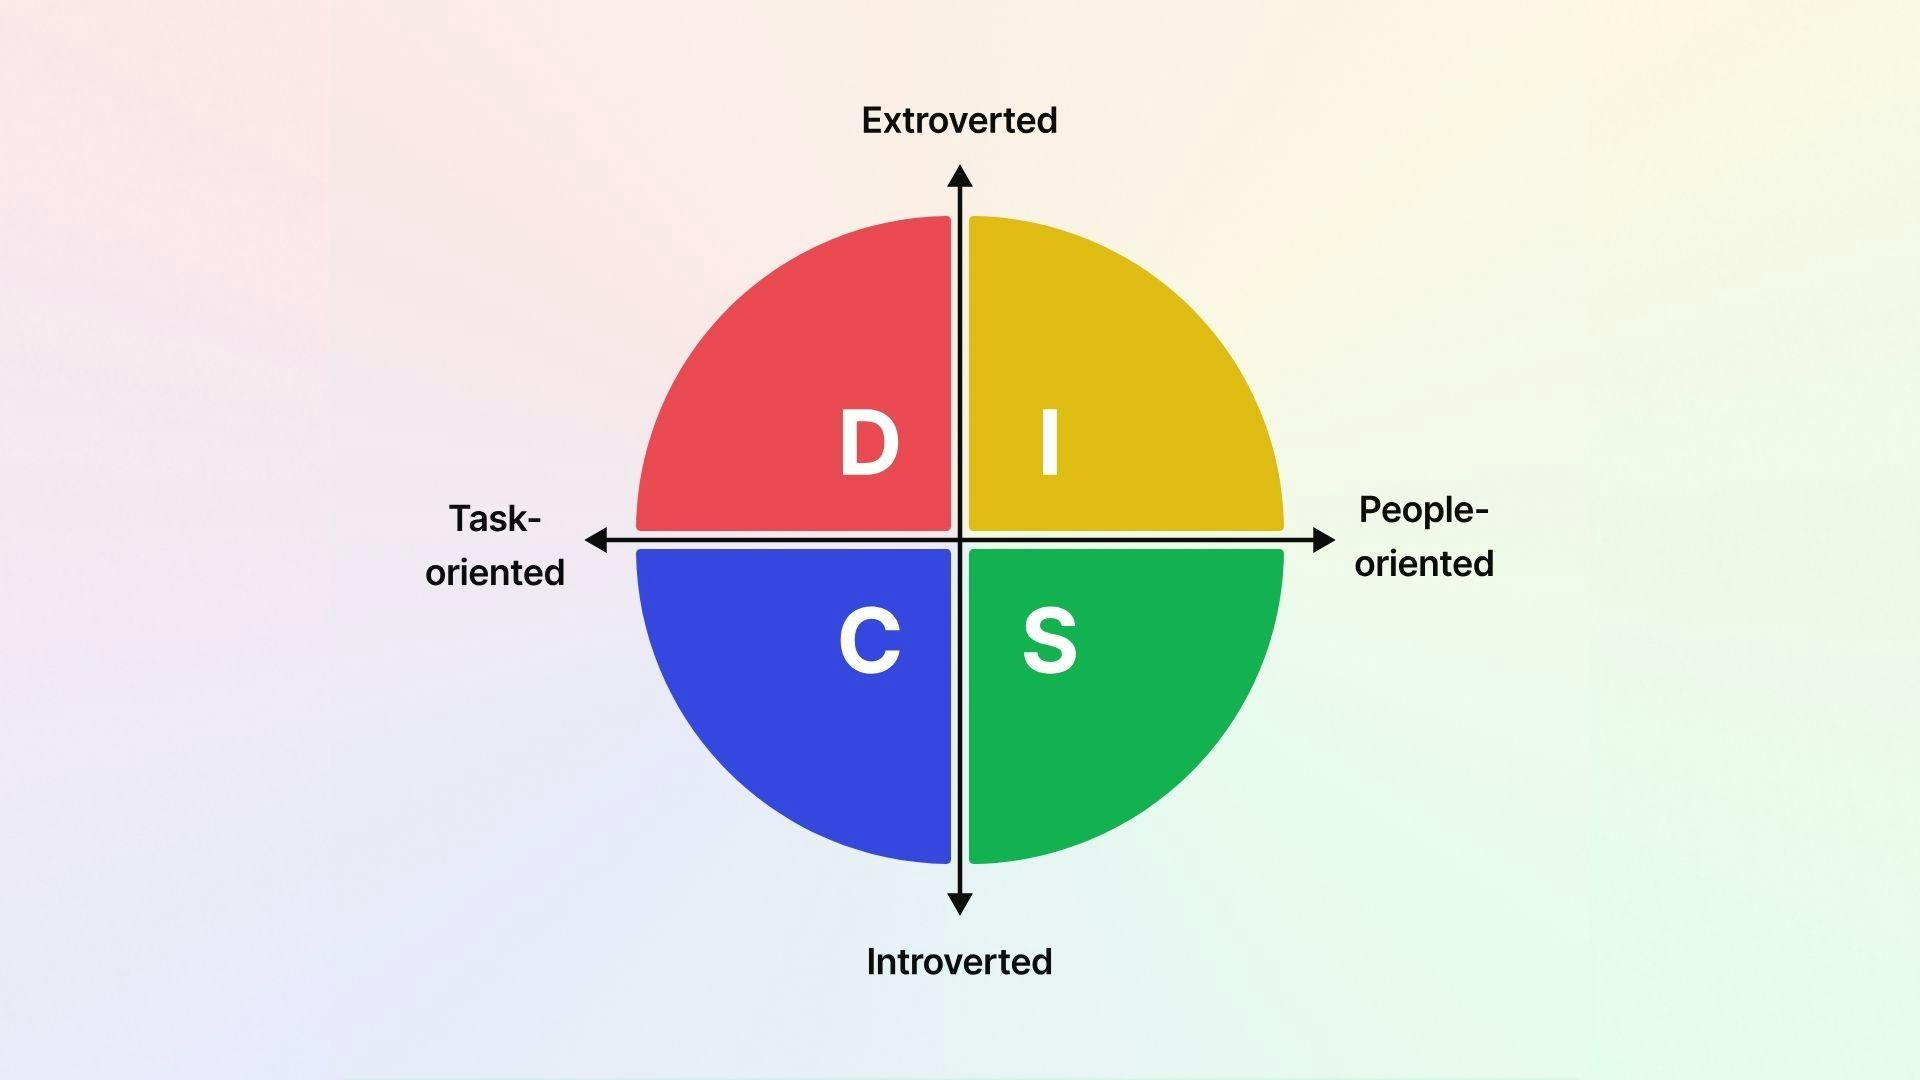 Image showing the 4 behavioral styles with a circle broken into 4 quadrants across two axis. Horizontal axis shows task-oriented on the left side and people-oriented on the right side. The vertical axis shows extroverted on the top and introverted on the bottom. D style is the top left quadrant (task-oriented and extroverted). I style is the top right (extroverted and people oriented). The S style is the bottom right quadrant (people-oriented and introverted). C style is the bottom left quadrant (introverted and task-oriented). 